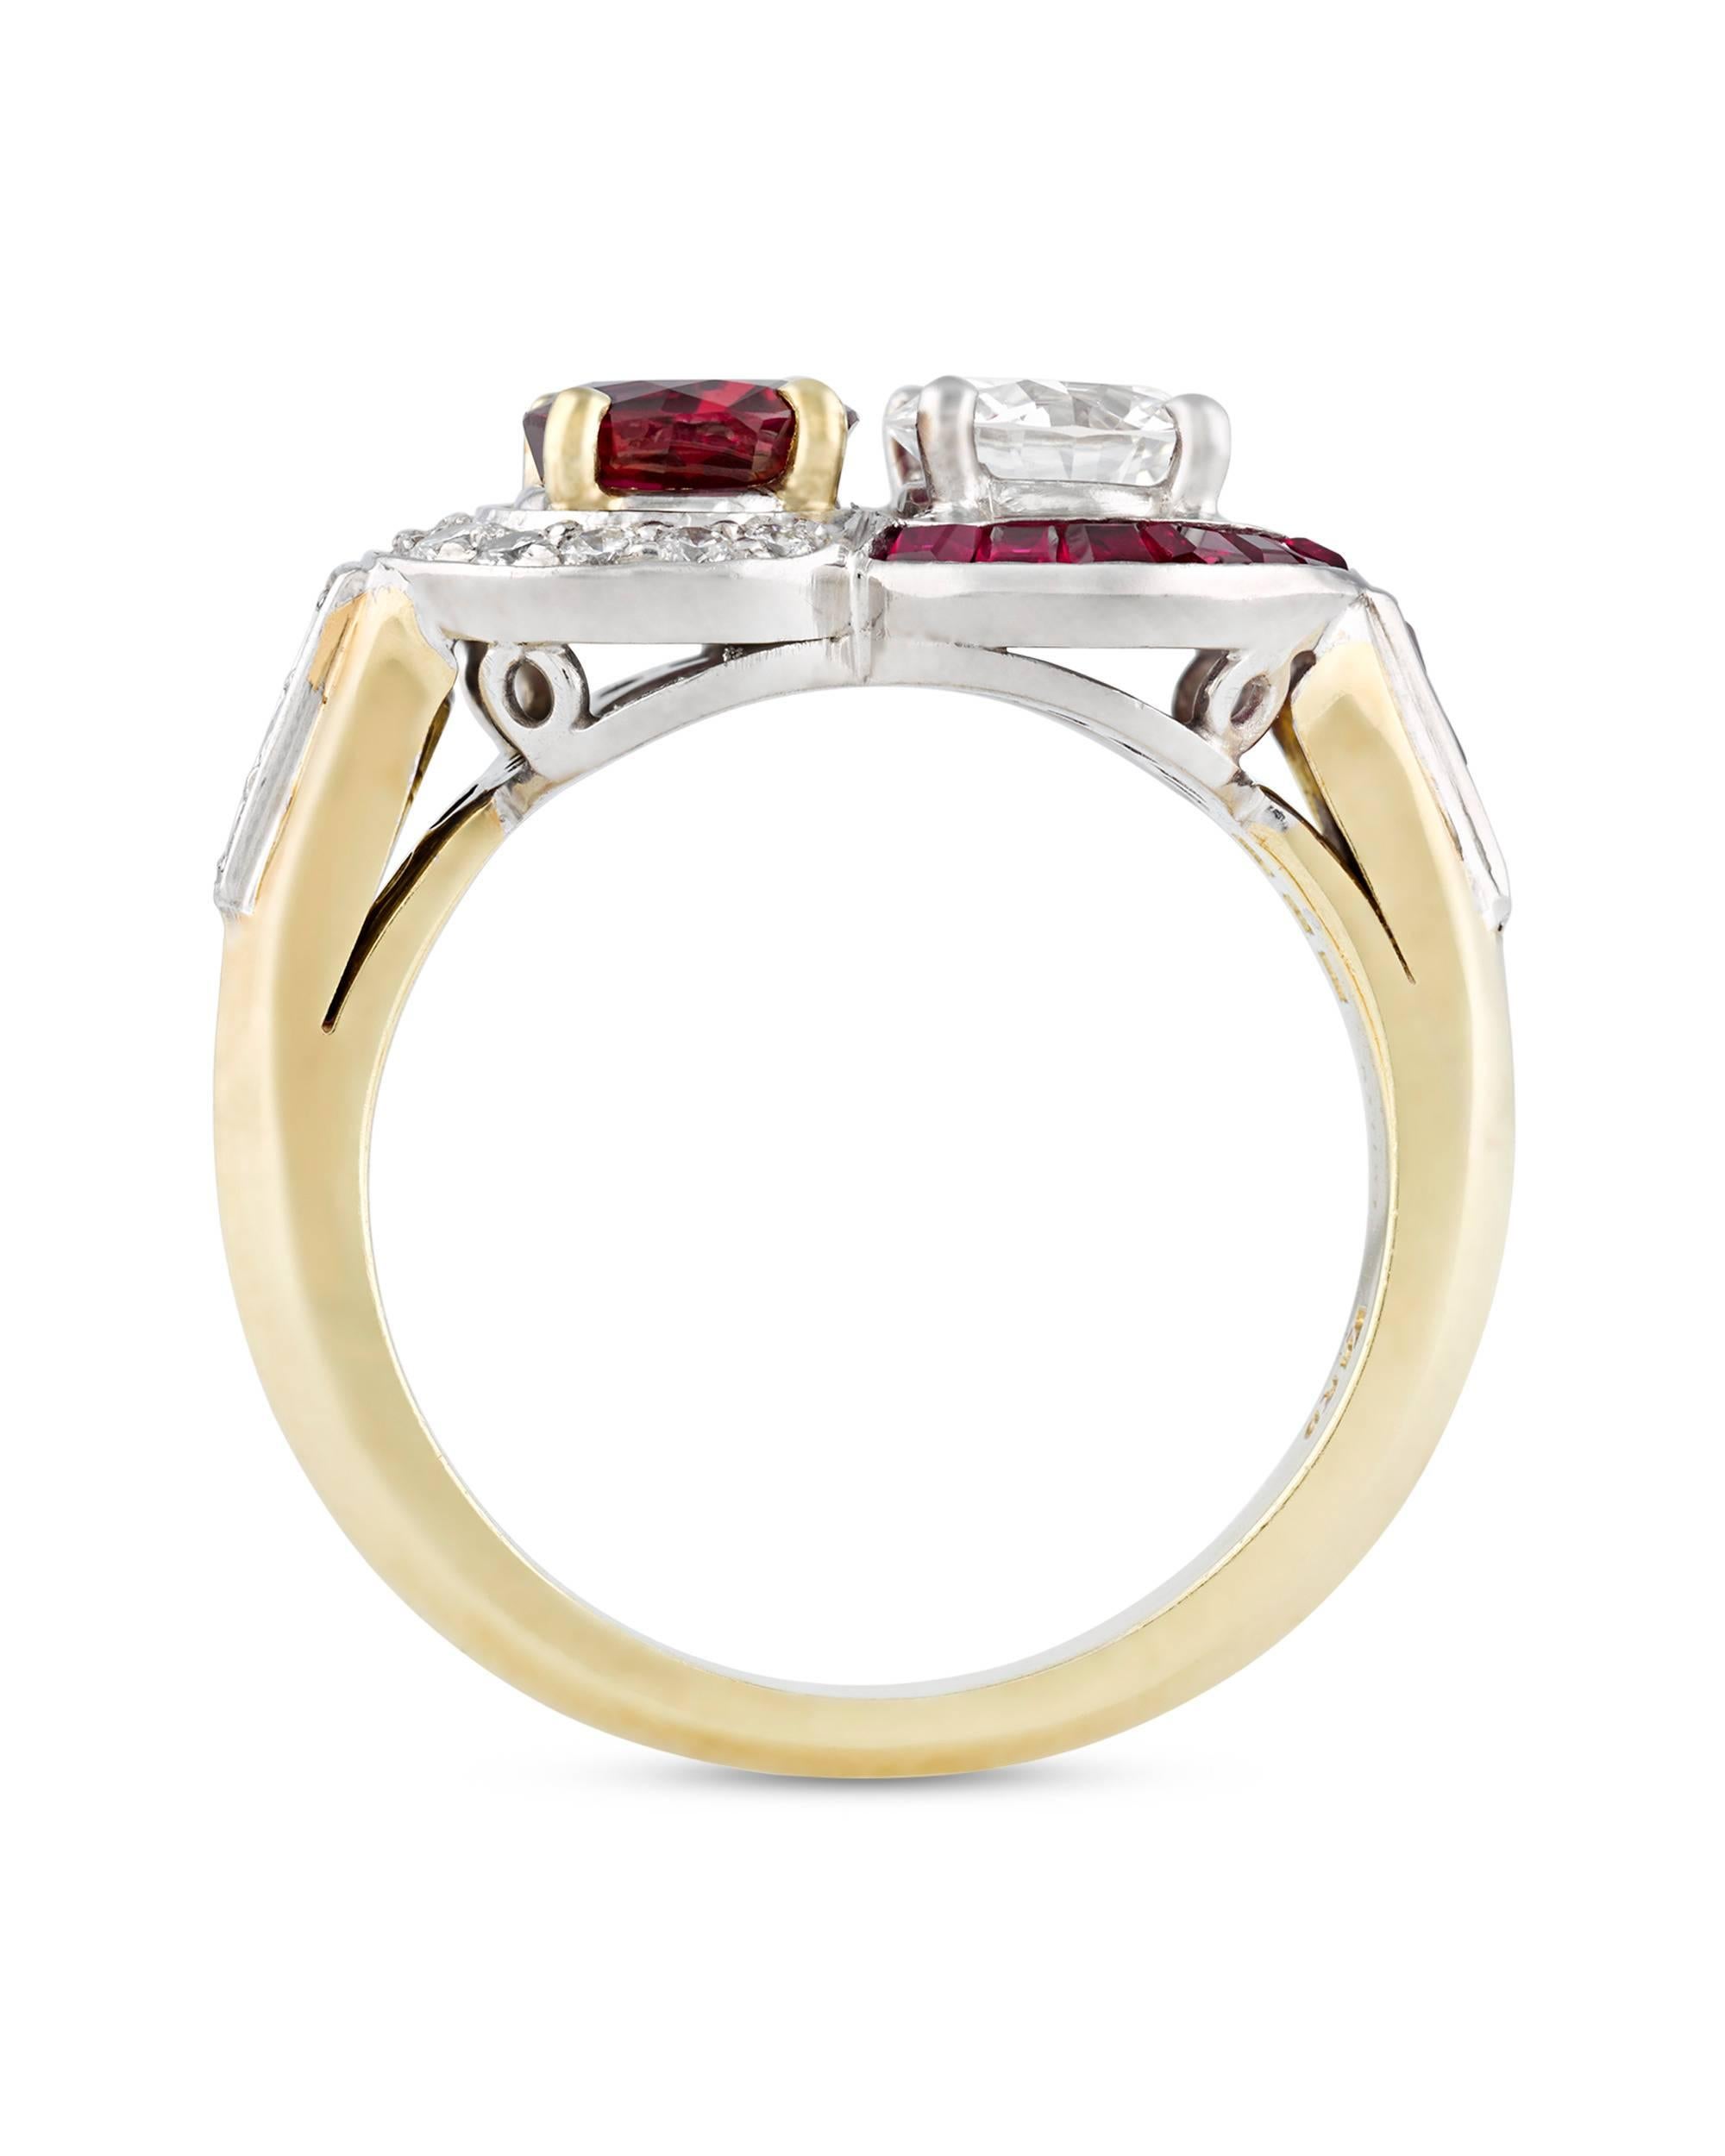 Swirling white diamonds complement rich crimson rubies in this extraordinary ring by New York-based jeweler Raymond Yard. Each brilliant stone is perfectly set in 18K yellow or white gold to reflect light and emphasize color. The center gems weigh